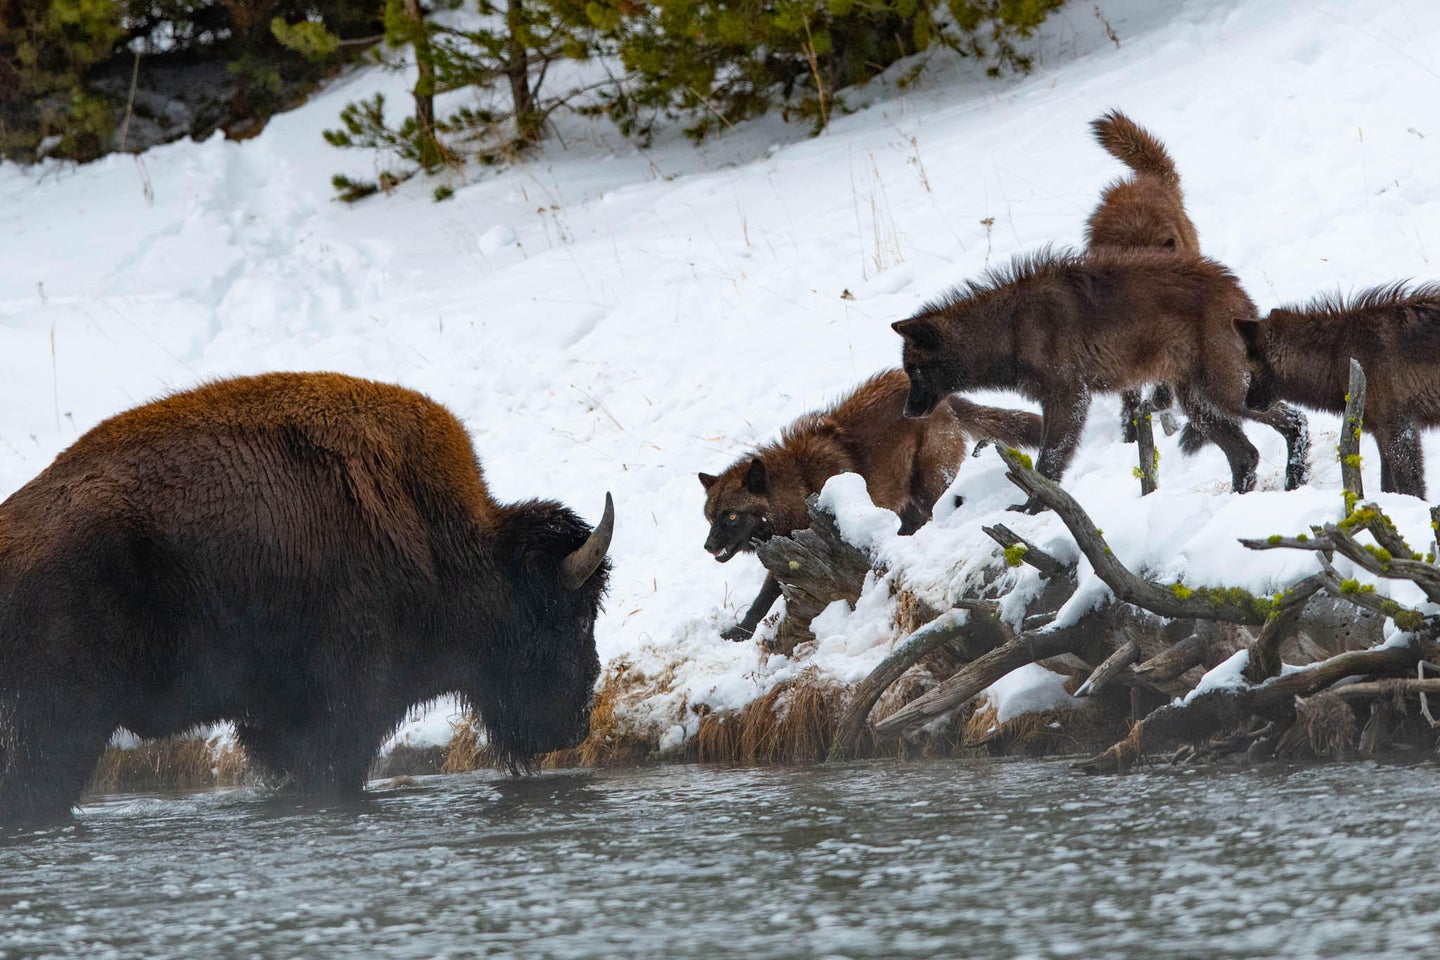 A recent standoff between a bison and a wolf in Yellowstone National Park.